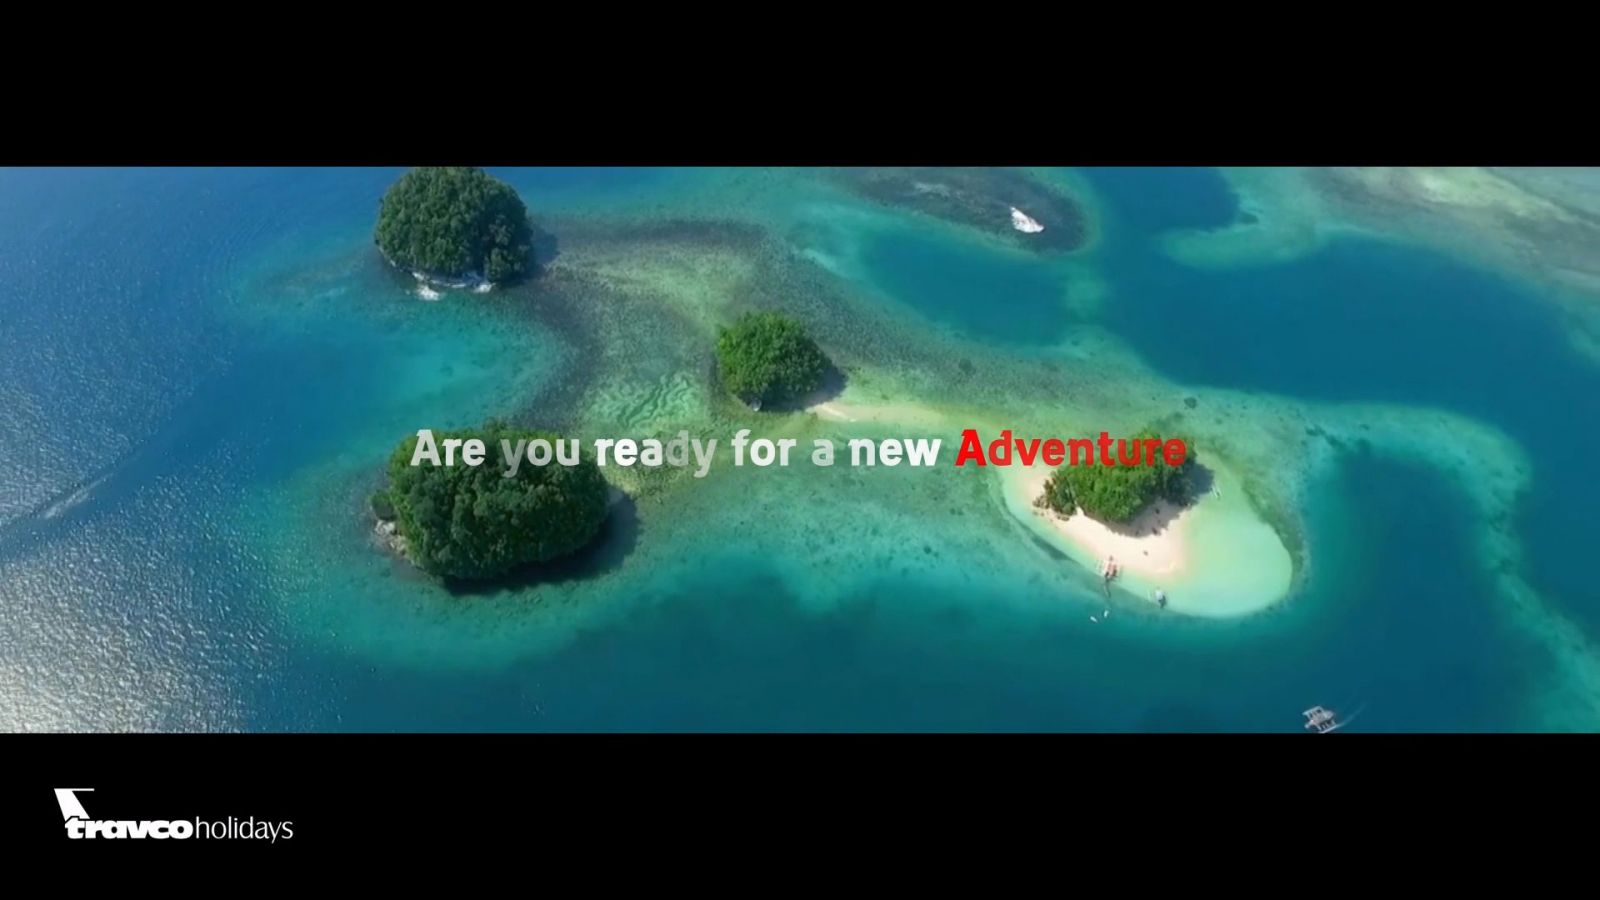 Thailand Teaser Campaign - Video Animation